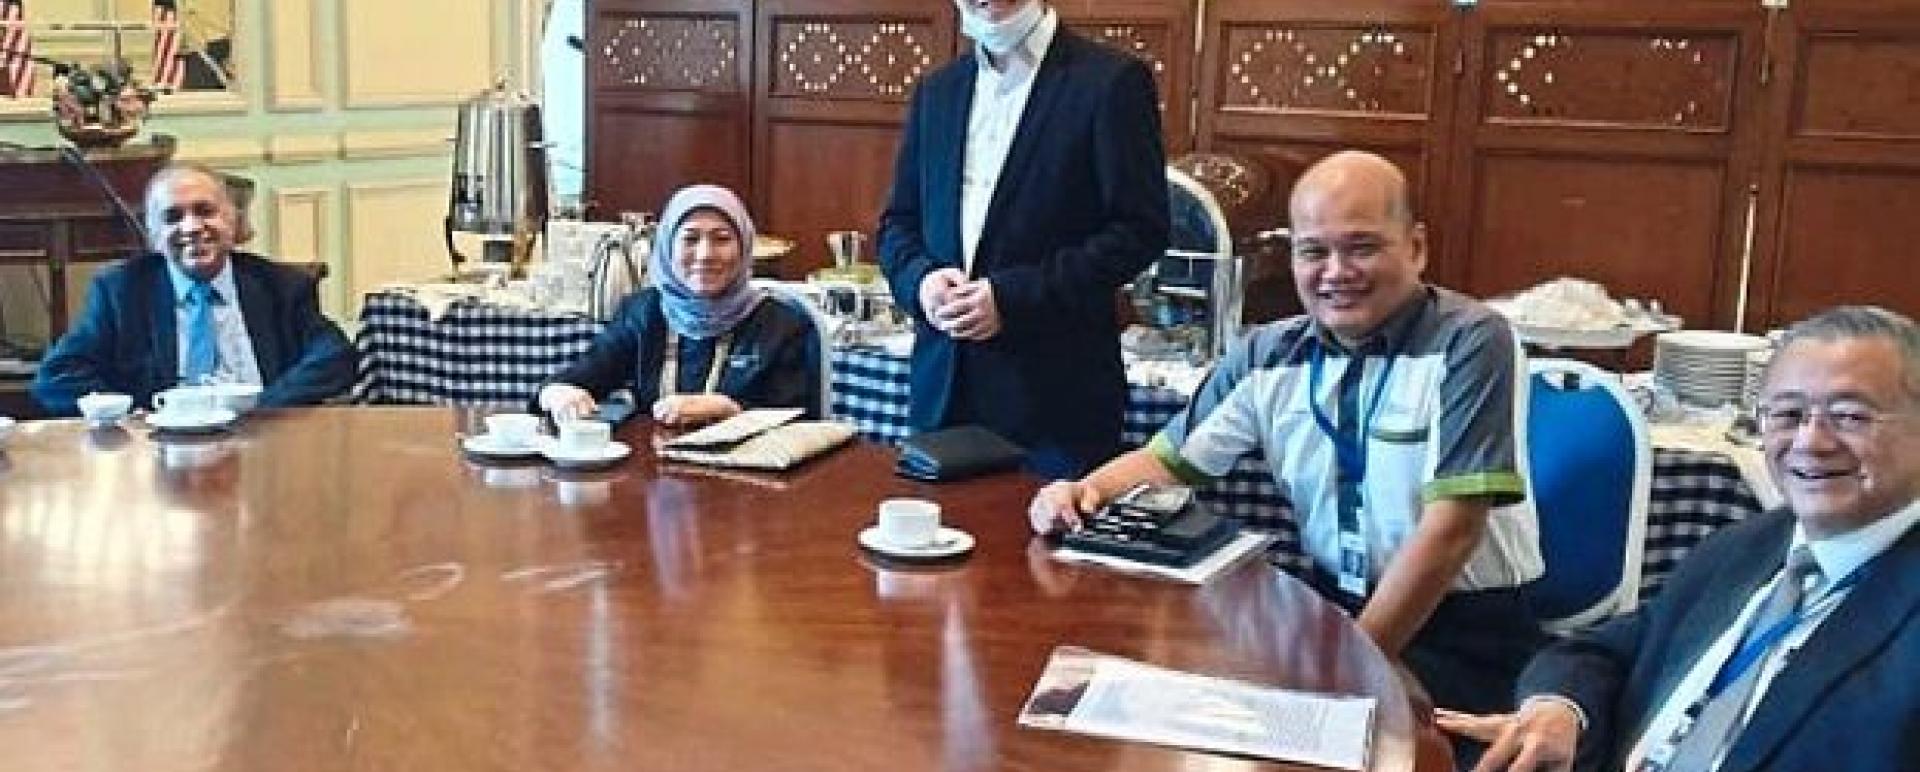 Meeting of minds: (From left) Ameer, Tourism and Culture Minister Datuk Seri Nancy Shukri, Chua, Khazanah managing director Datuk Shahril Ridza Ridzuan and Teo sharing their views on how the country can move forward post-Covid-19.